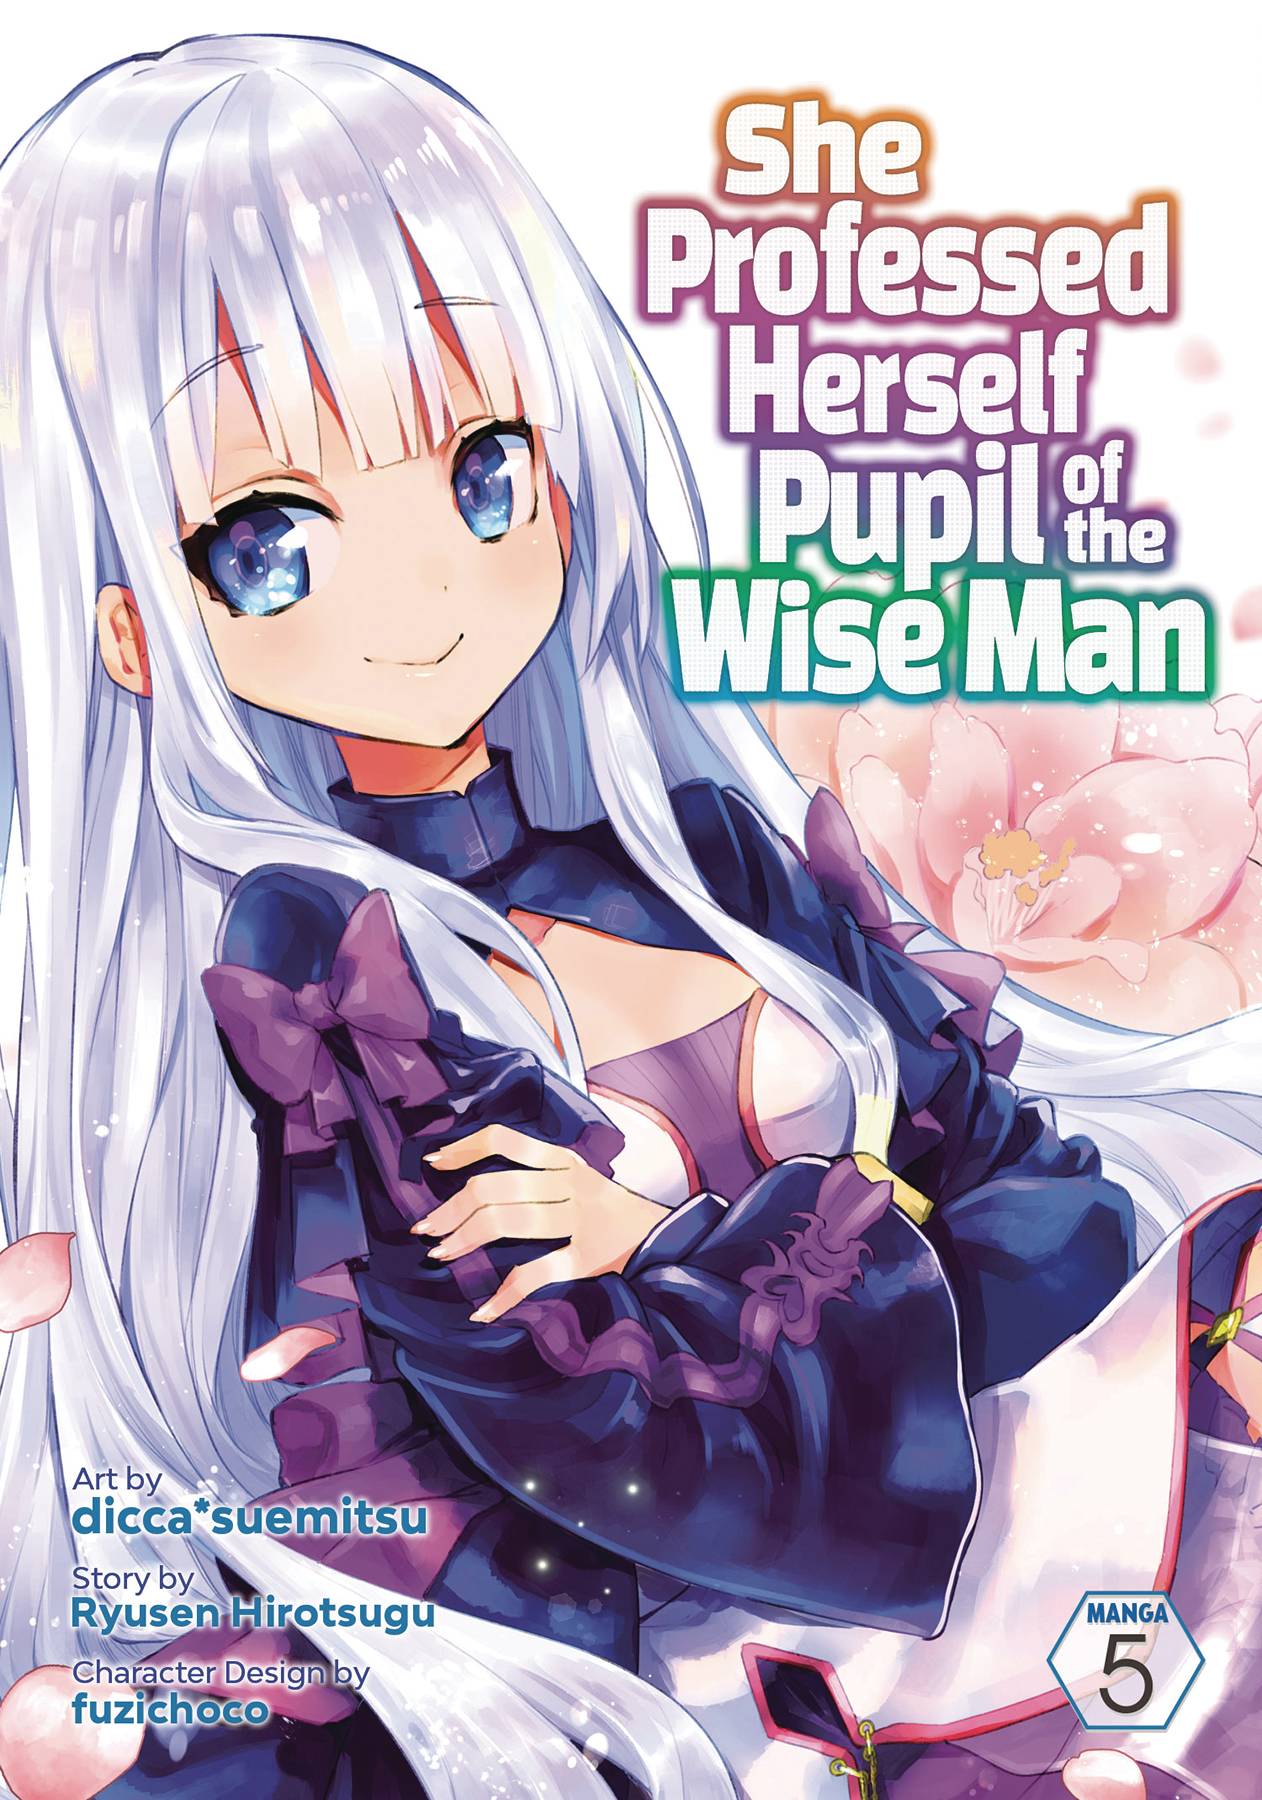 SHE PROFESSED HERSELF PUPIL OF WISE MAN GN VOL 05 (MR)